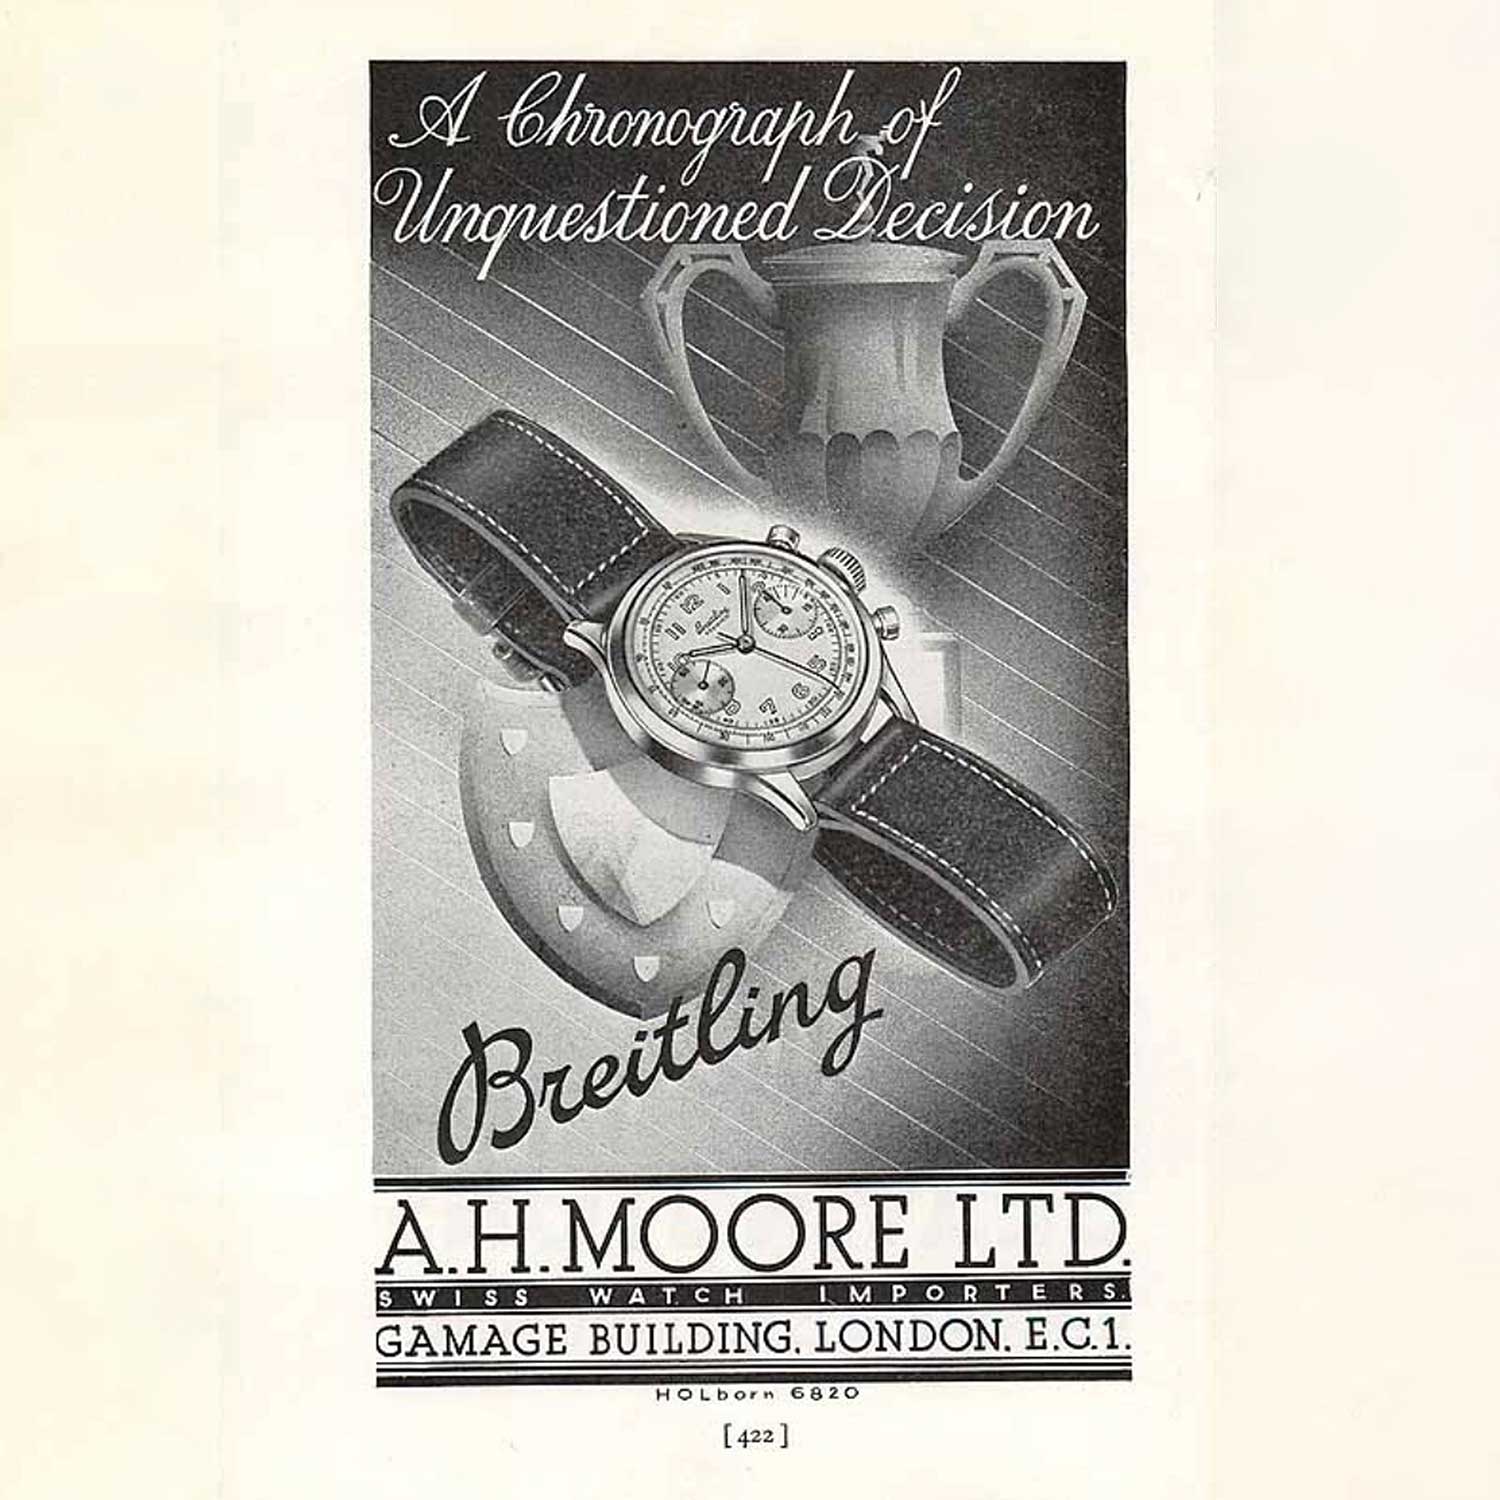 An advertisement for the Breitling Premier from 1948